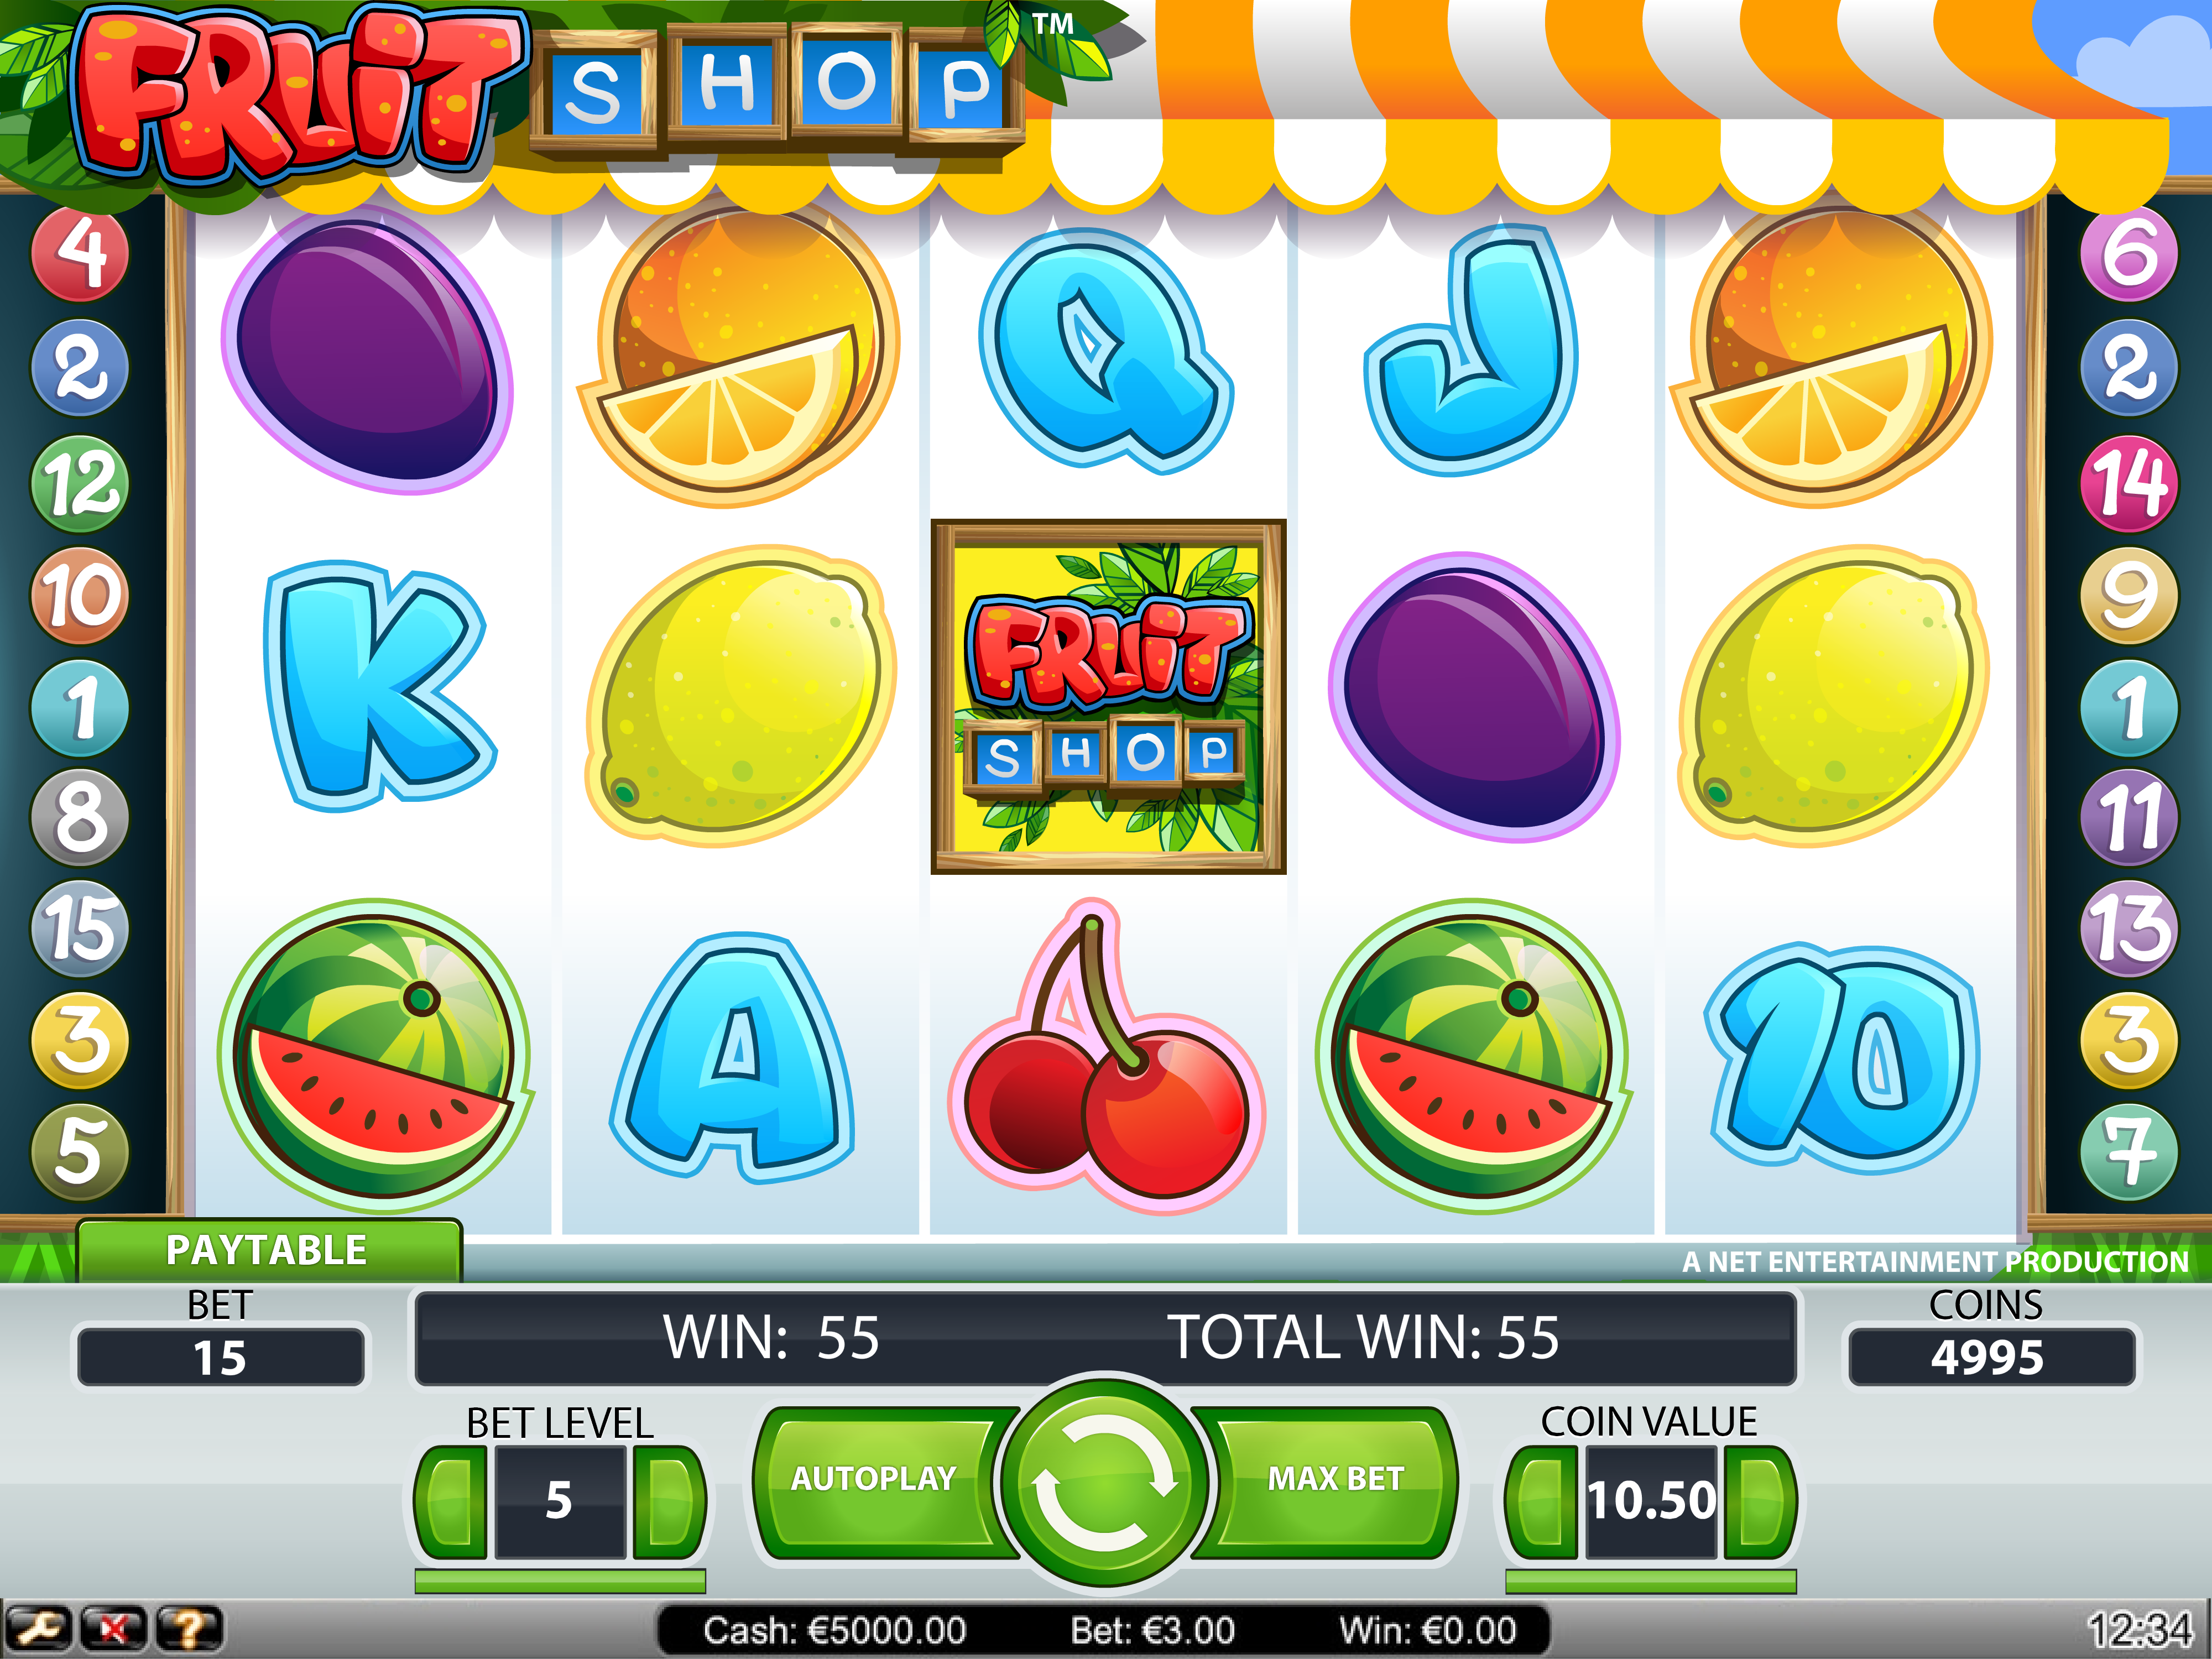  casino slots games online free play